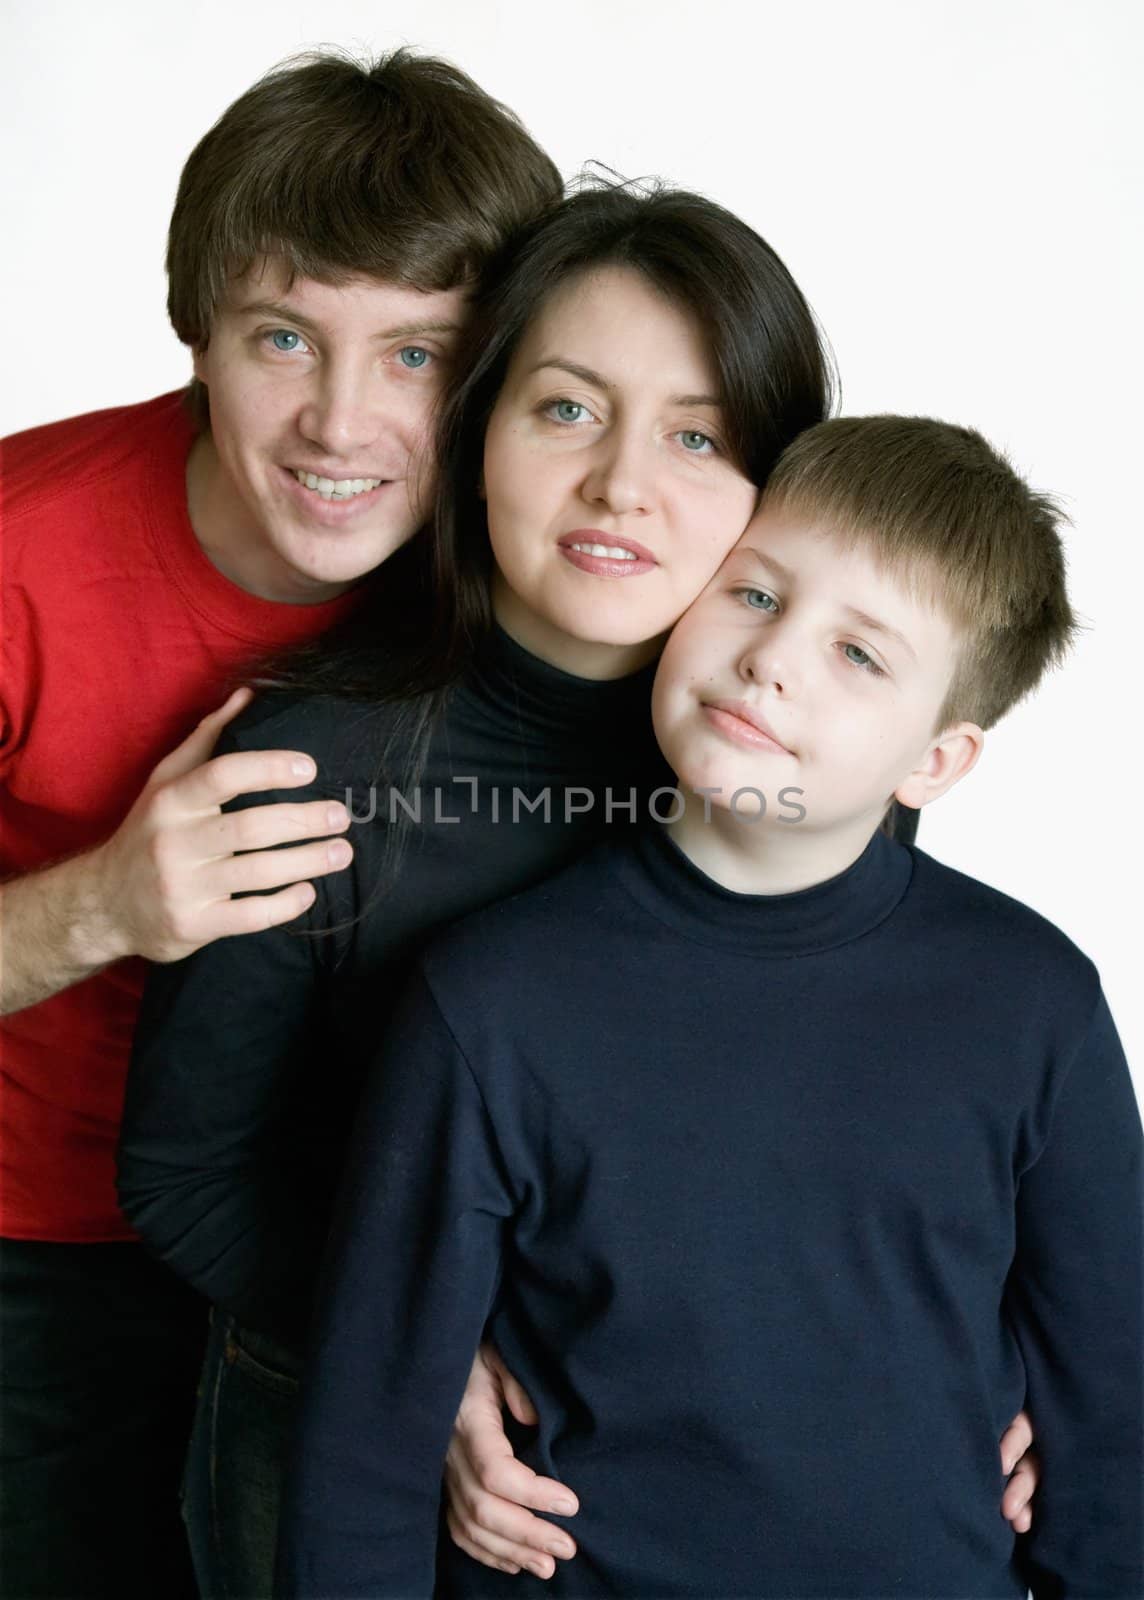 Smiling family on a white background.